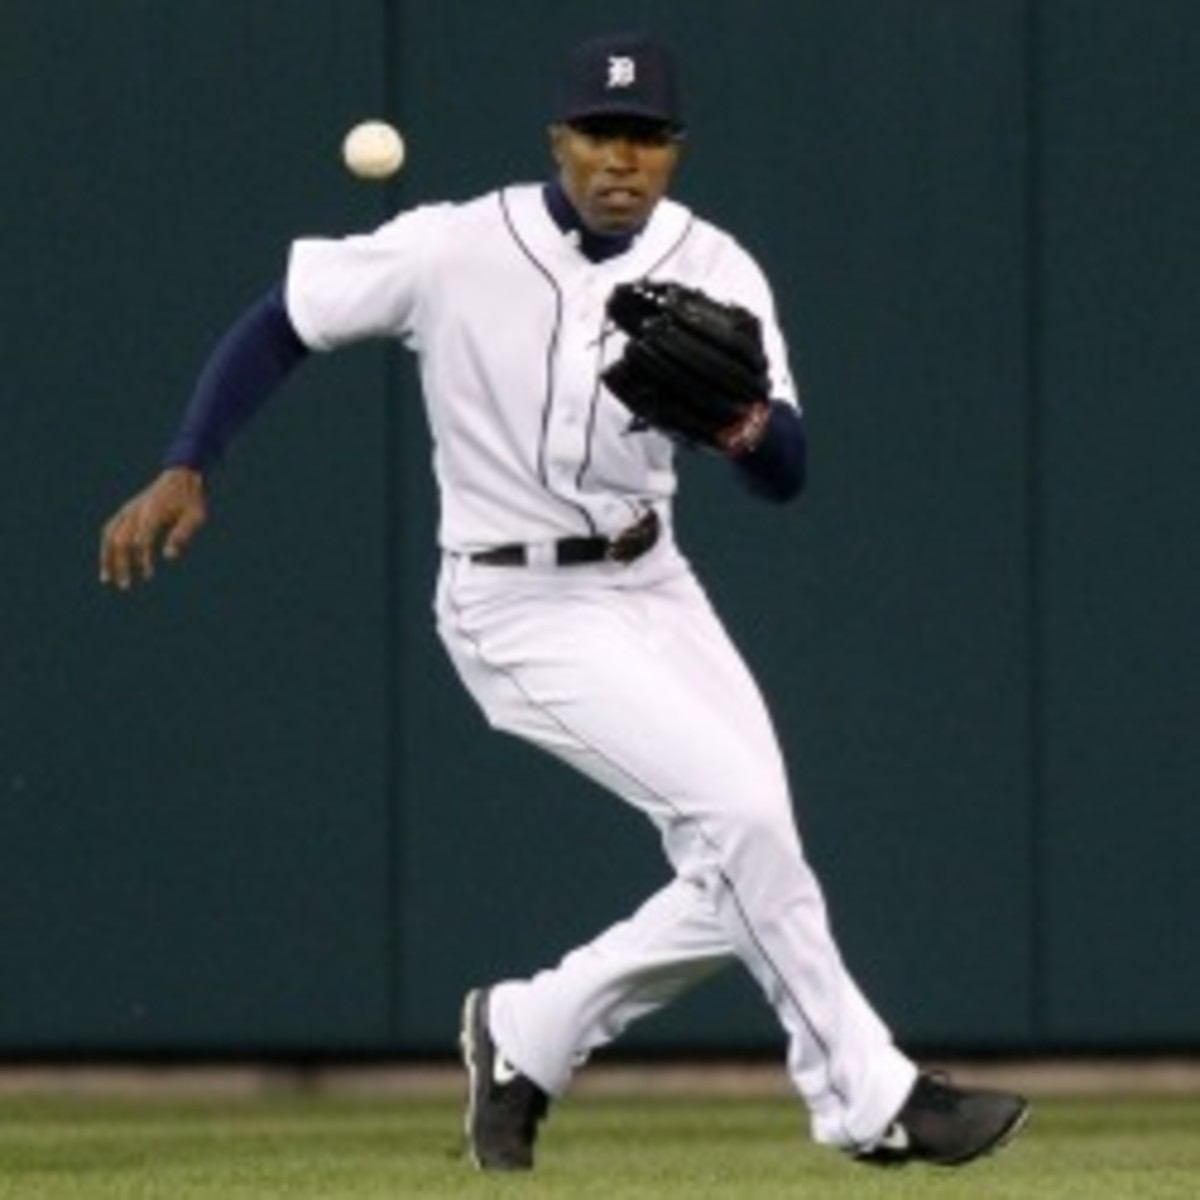 Austin Jackson is heading to the DL with a pulled right hamstring. (Photo by Duane Burleson/Getty Images)